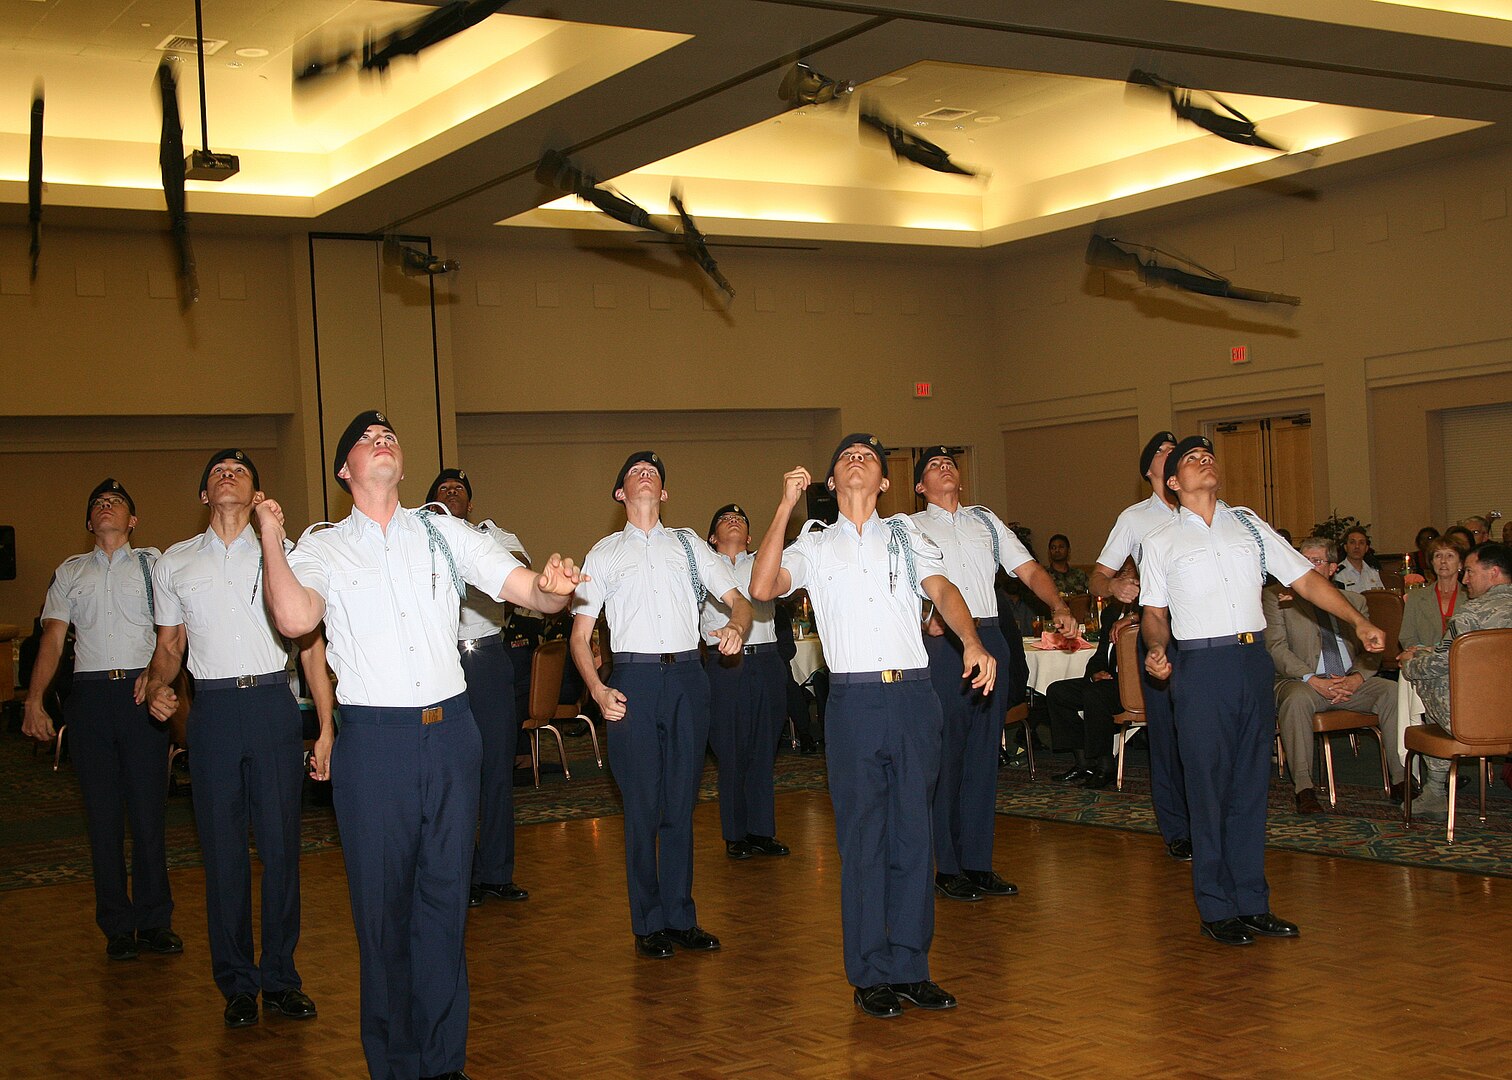 The John Jay High School Junior ROTC male group performs during the African American Heritage Committee luncheon Feb. 15 at the Gateway Club on Lackland Air Force Base, Texas. More than 370 members of Team Lackland attended the event. (USAF photo by Robbin Cresswell)